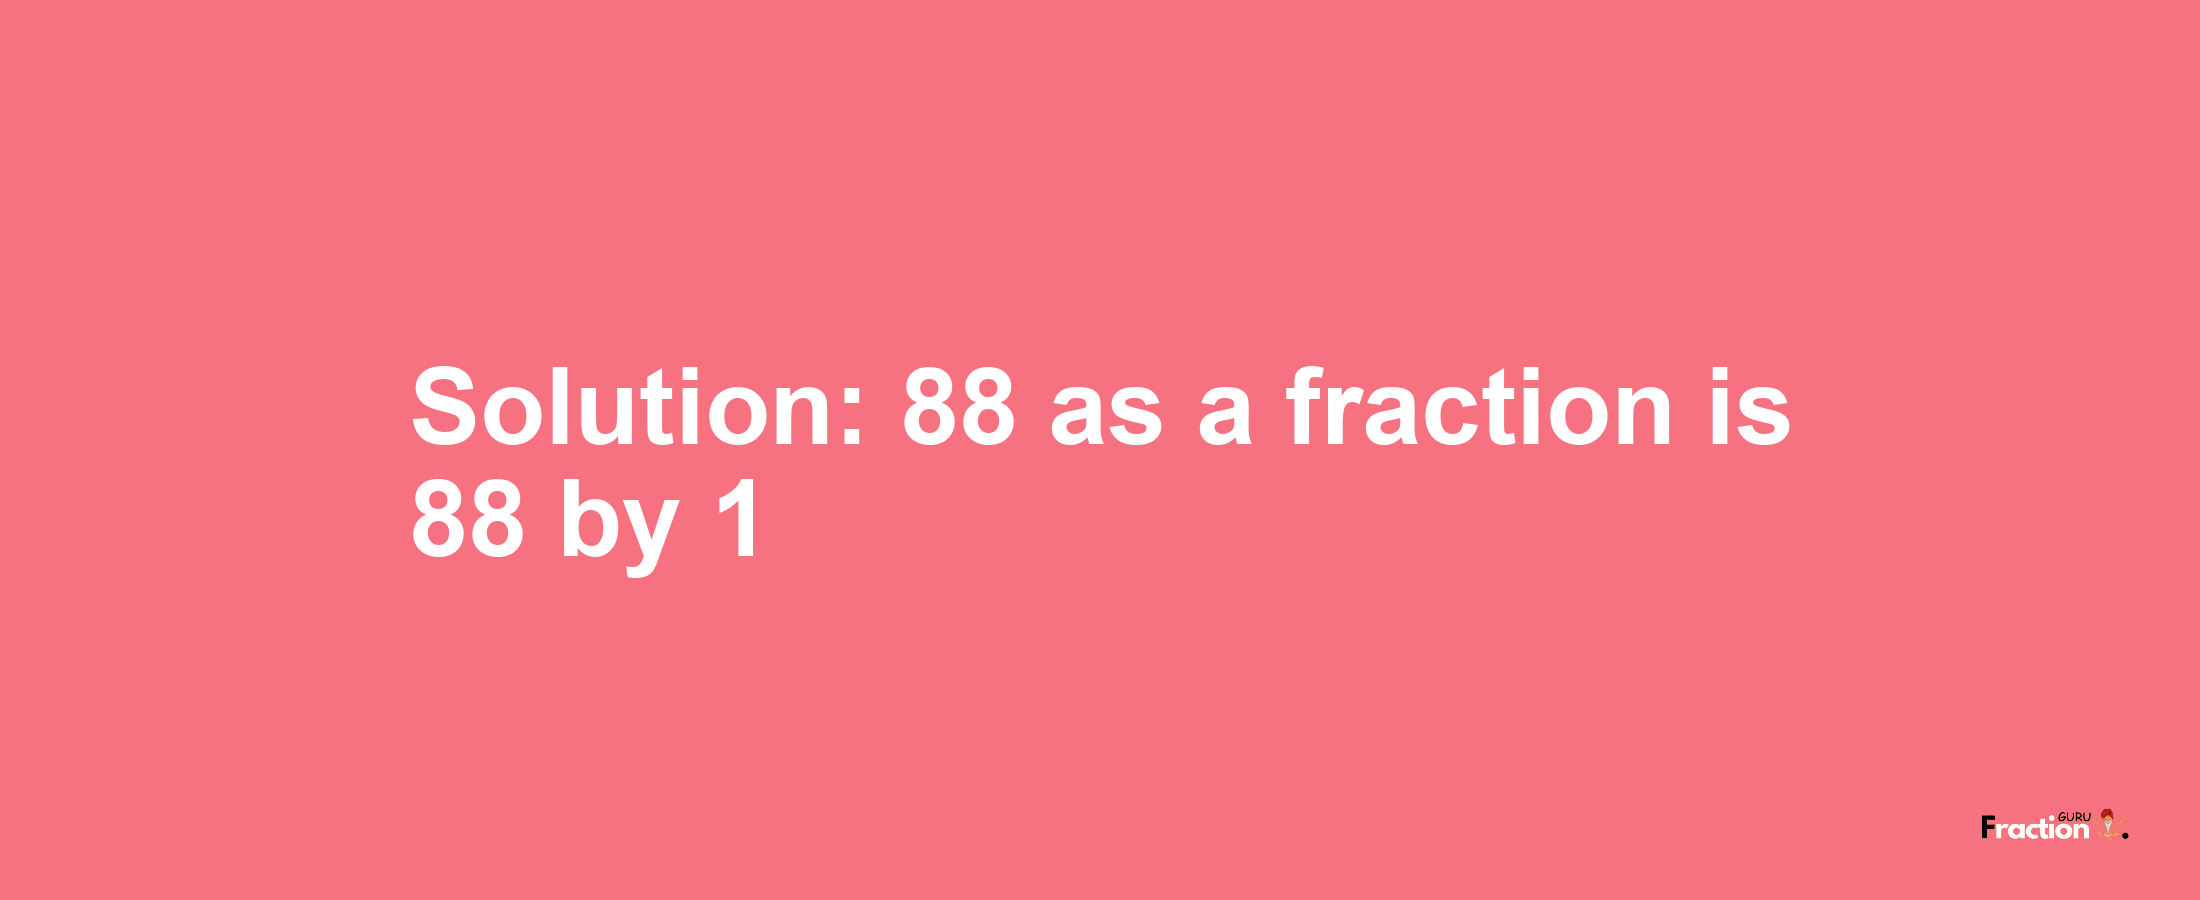 Solution:88 as a fraction is 88/1